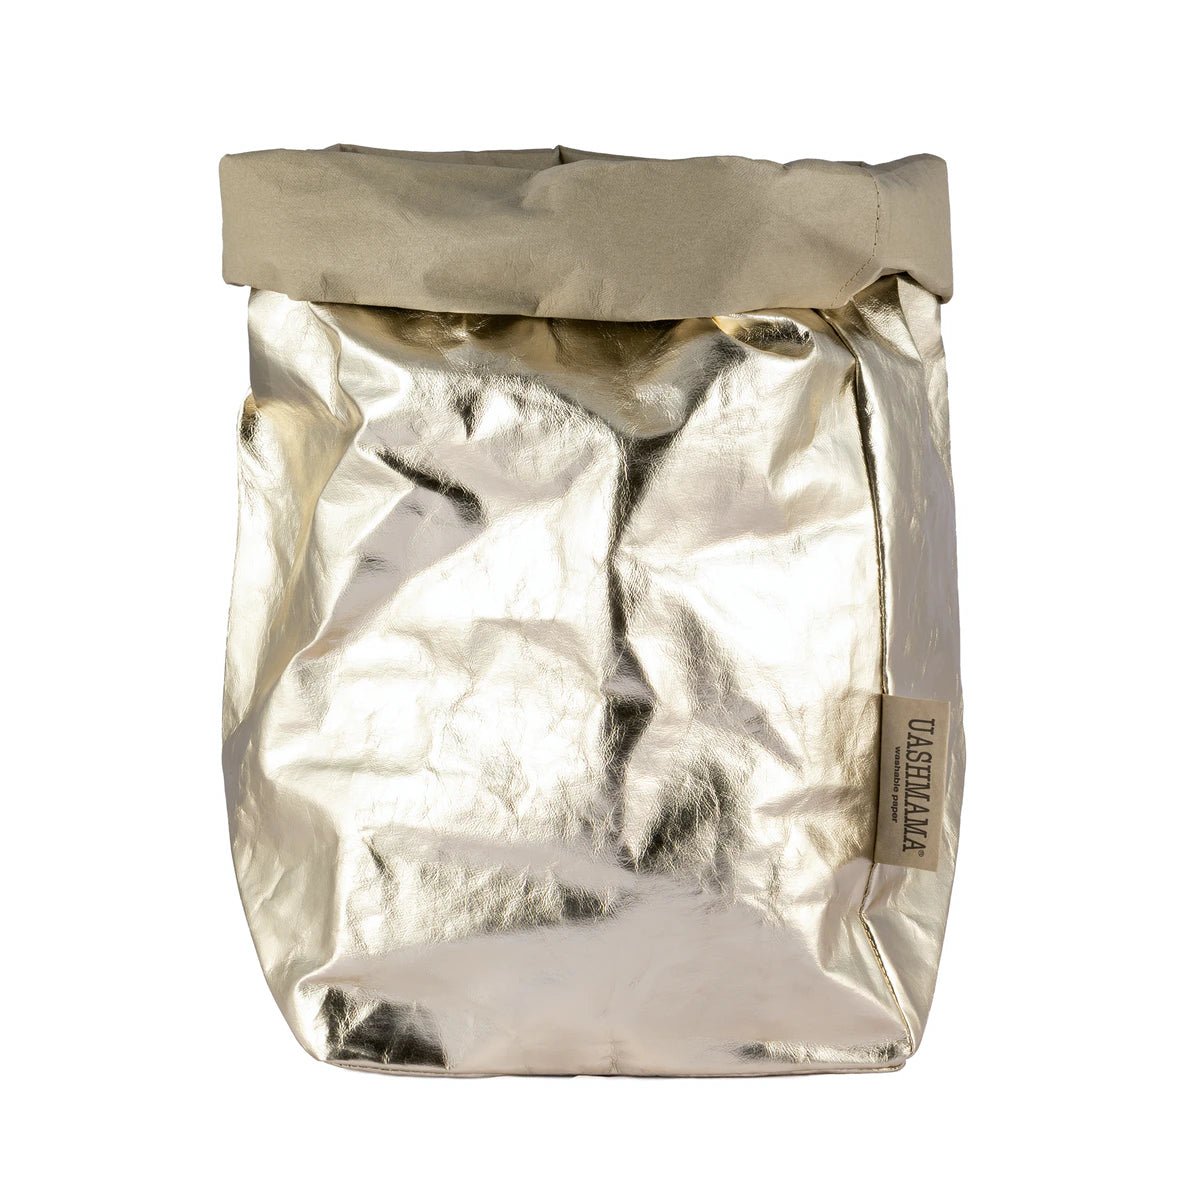 A washable paper bag is shown. The bag is rolled down at the top and features a UASHMAMA logo label on the bottom left corner. The bag pictured is the extra large size in platinum.